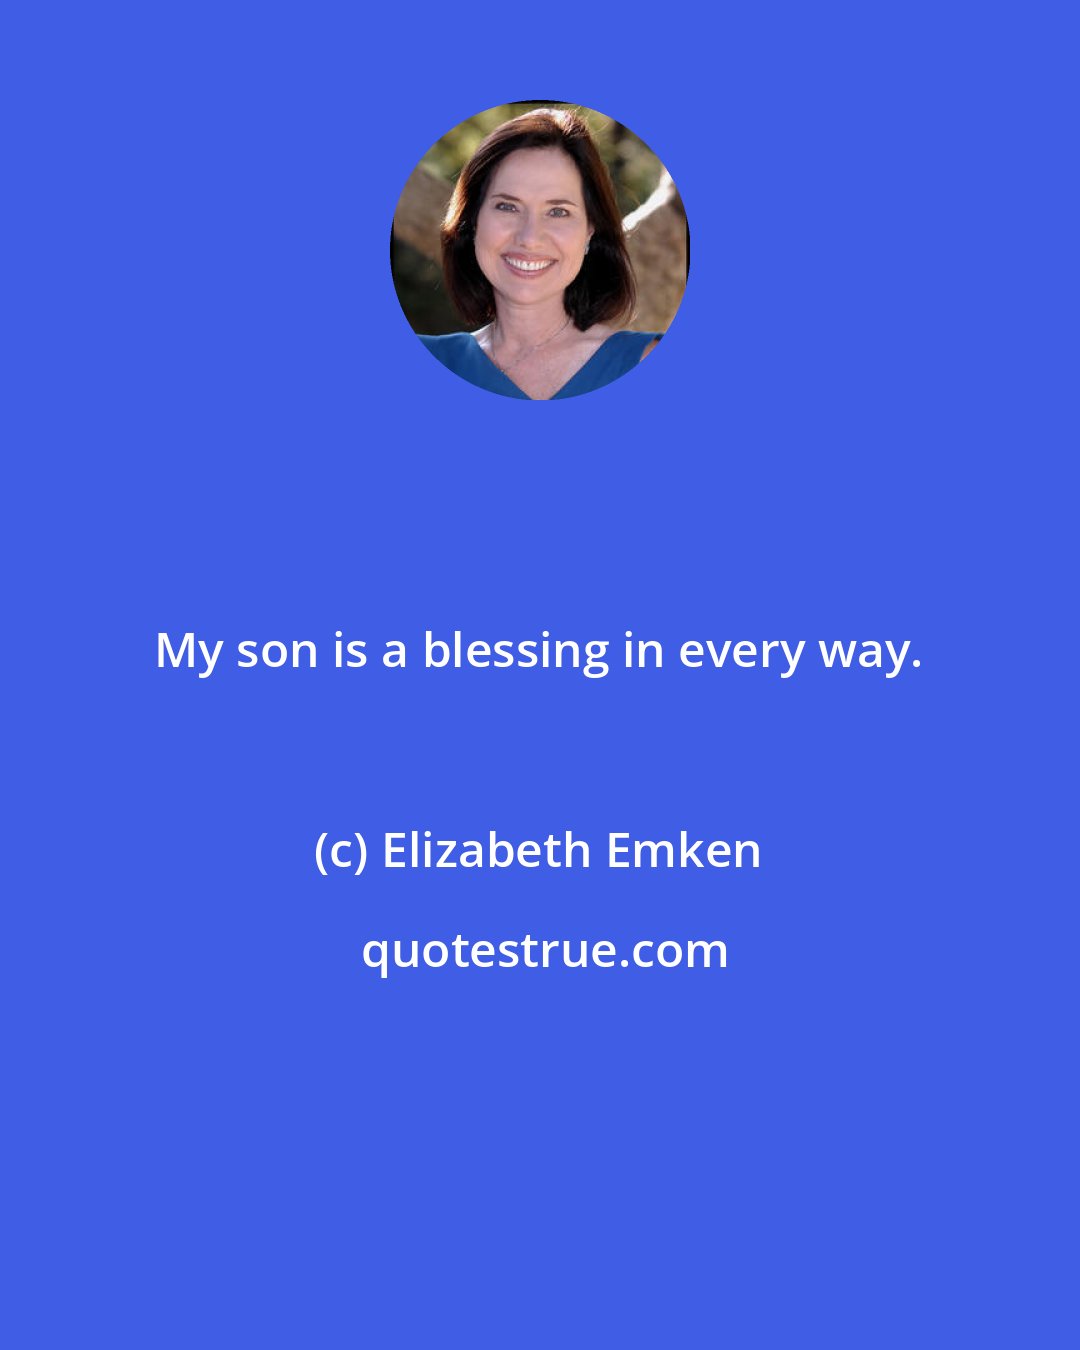 Elizabeth Emken: My son is a blessing in every way.